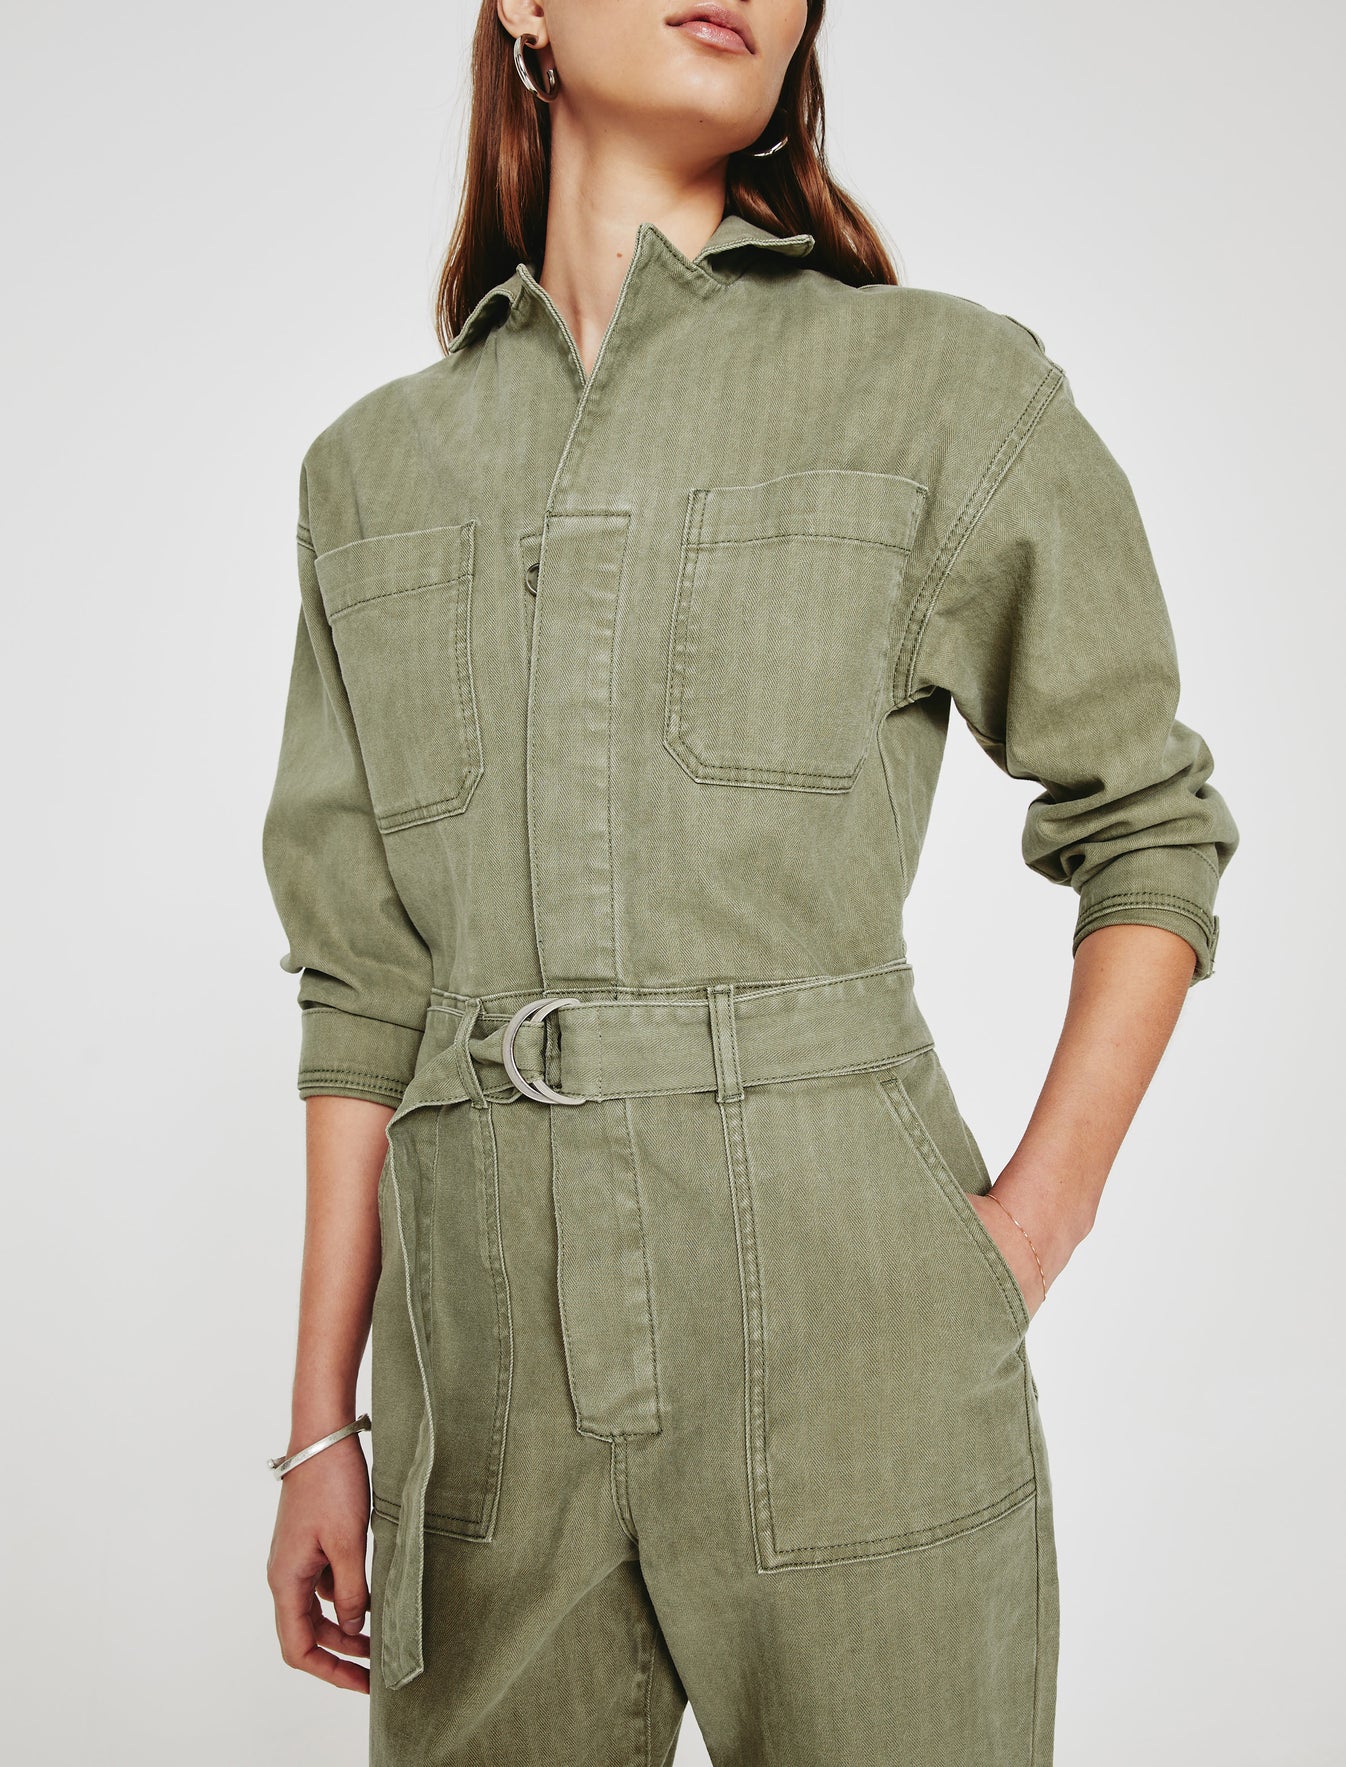 Womens Ryleigh Jumpsuit Sulfur Cavalry Sage at AG Jeans Official Store